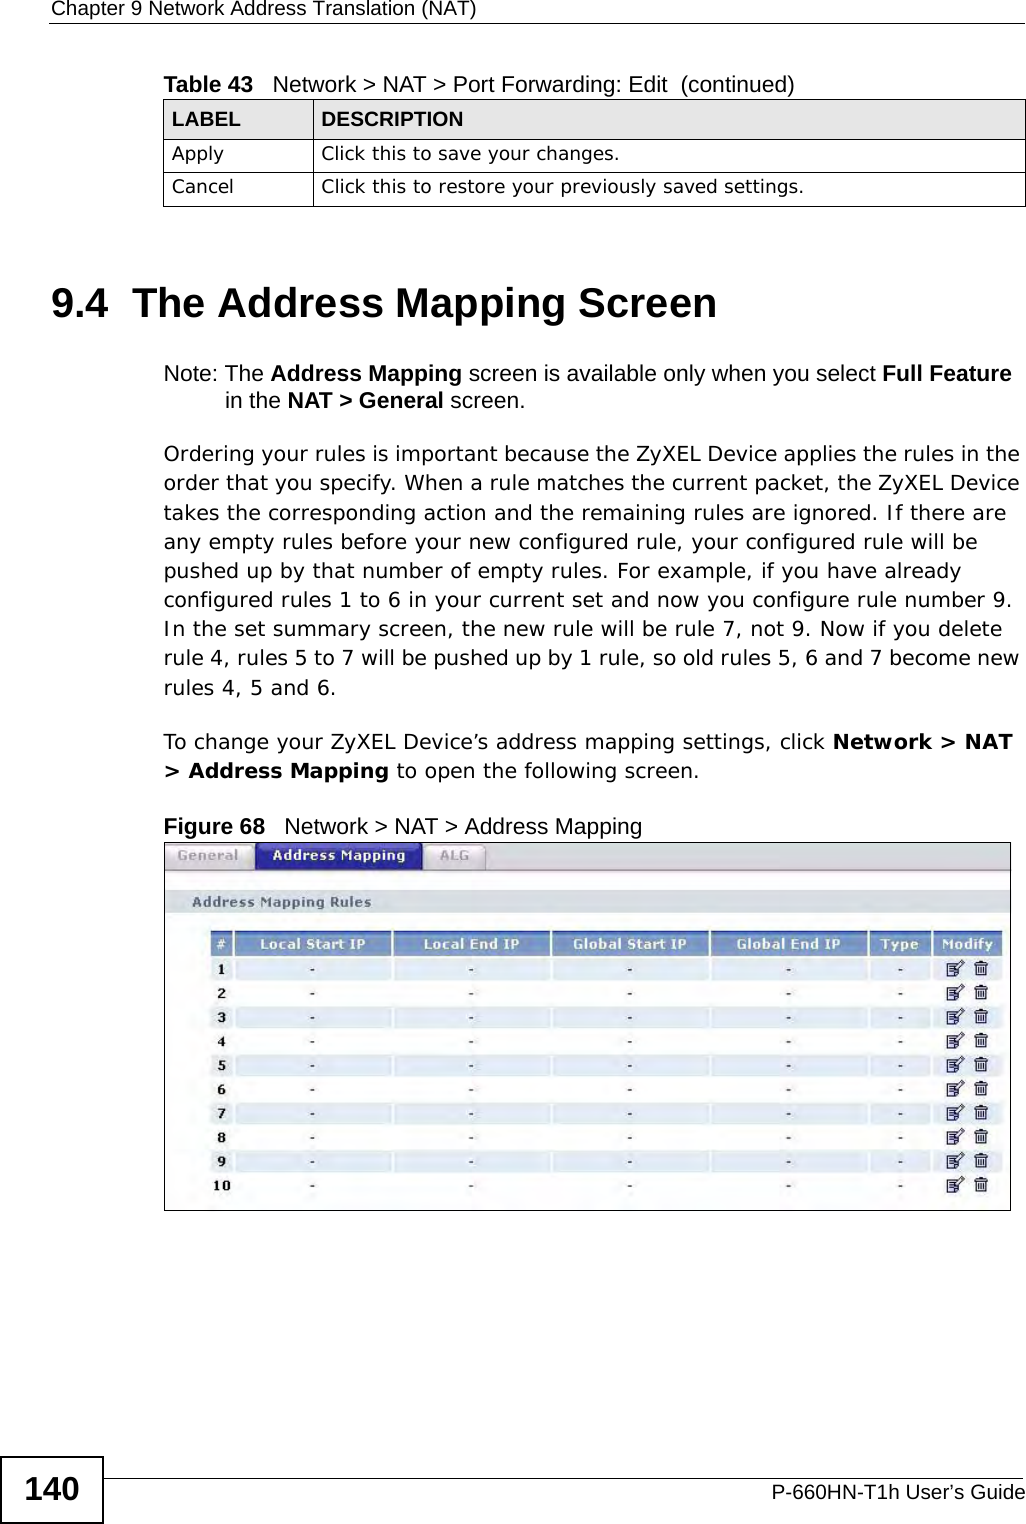 Chapter 9 Network Address Translation (NAT)P-660HN-T1h User’s Guide1409.4  The Address Mapping ScreenNote: The Address Mapping screen is available only when you select Full Feature in the NAT &gt; General screen.Ordering your rules is important because the ZyXEL Device applies the rules in the order that you specify. When a rule matches the current packet, the ZyXEL Device takes the corresponding action and the remaining rules are ignored. If there are any empty rules before your new configured rule, your configured rule will be pushed up by that number of empty rules. For example, if you have already configured rules 1 to 6 in your current set and now you configure rule number 9. In the set summary screen, the new rule will be rule 7, not 9. Now if you delete rule 4, rules 5 to 7 will be pushed up by 1 rule, so old rules 5, 6 and 7 become new rules 4, 5 and 6. To change your ZyXEL Device’s address mapping settings, click Network &gt; NAT &gt; Address Mapping to open the following screen.Figure 68   Network &gt; NAT &gt; Address MappingApply Click this to save your changes.Cancel Click this to restore your previously saved settings.Table 43   Network &gt; NAT &gt; Port Forwarding: Edit  (continued)LABEL DESCRIPTION